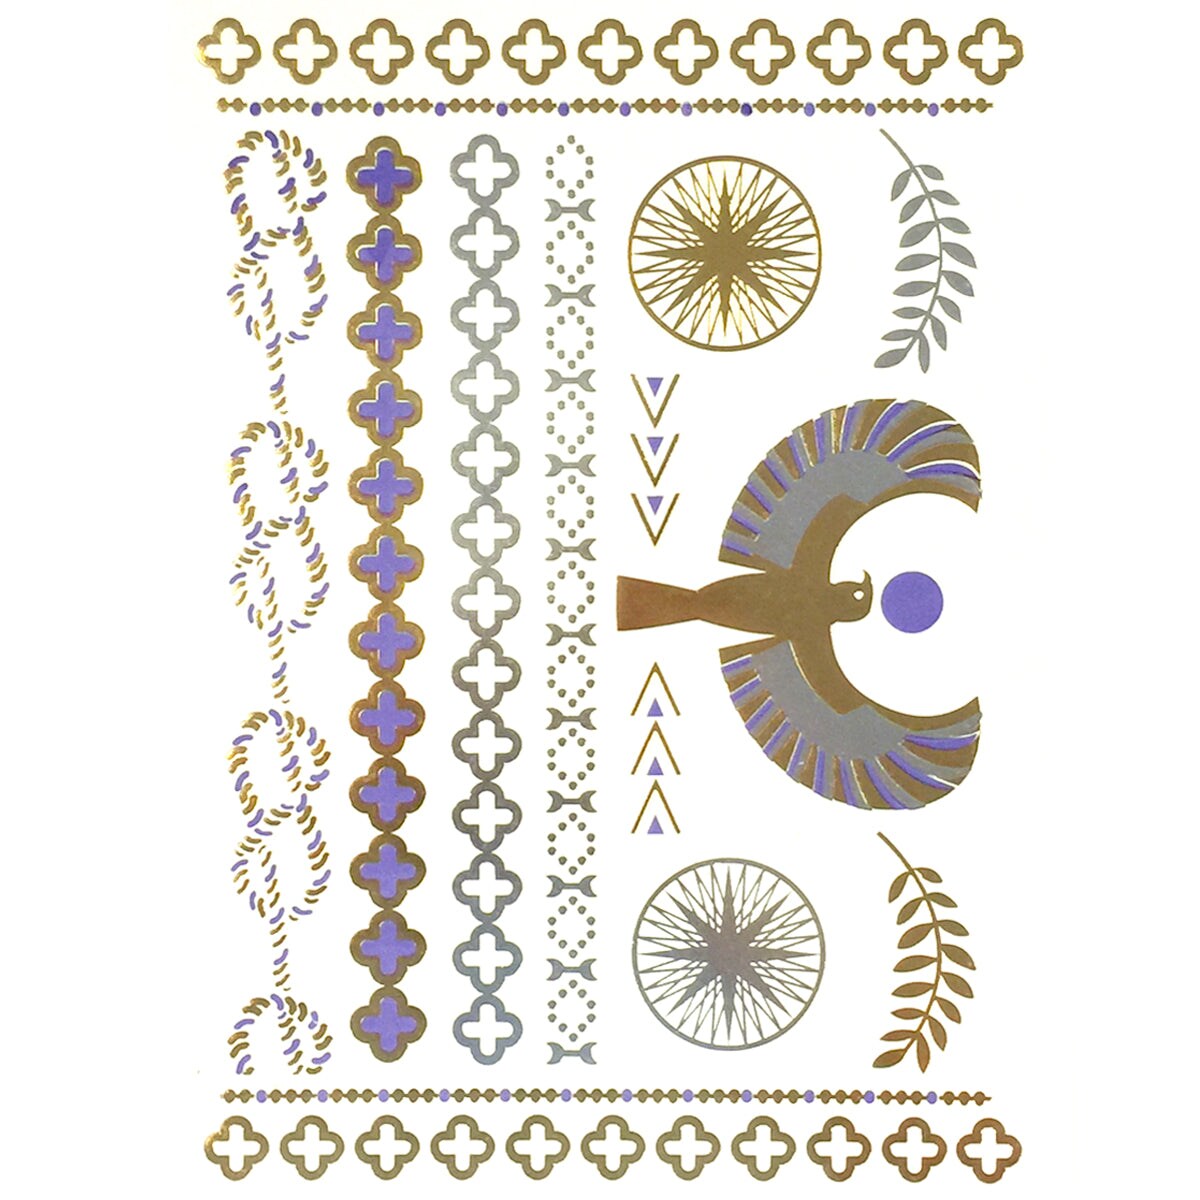 Wrapables Celebrity Inspired Temporary Tattoos in Metallic Gold Silver and Black, Purple Goddess, Large